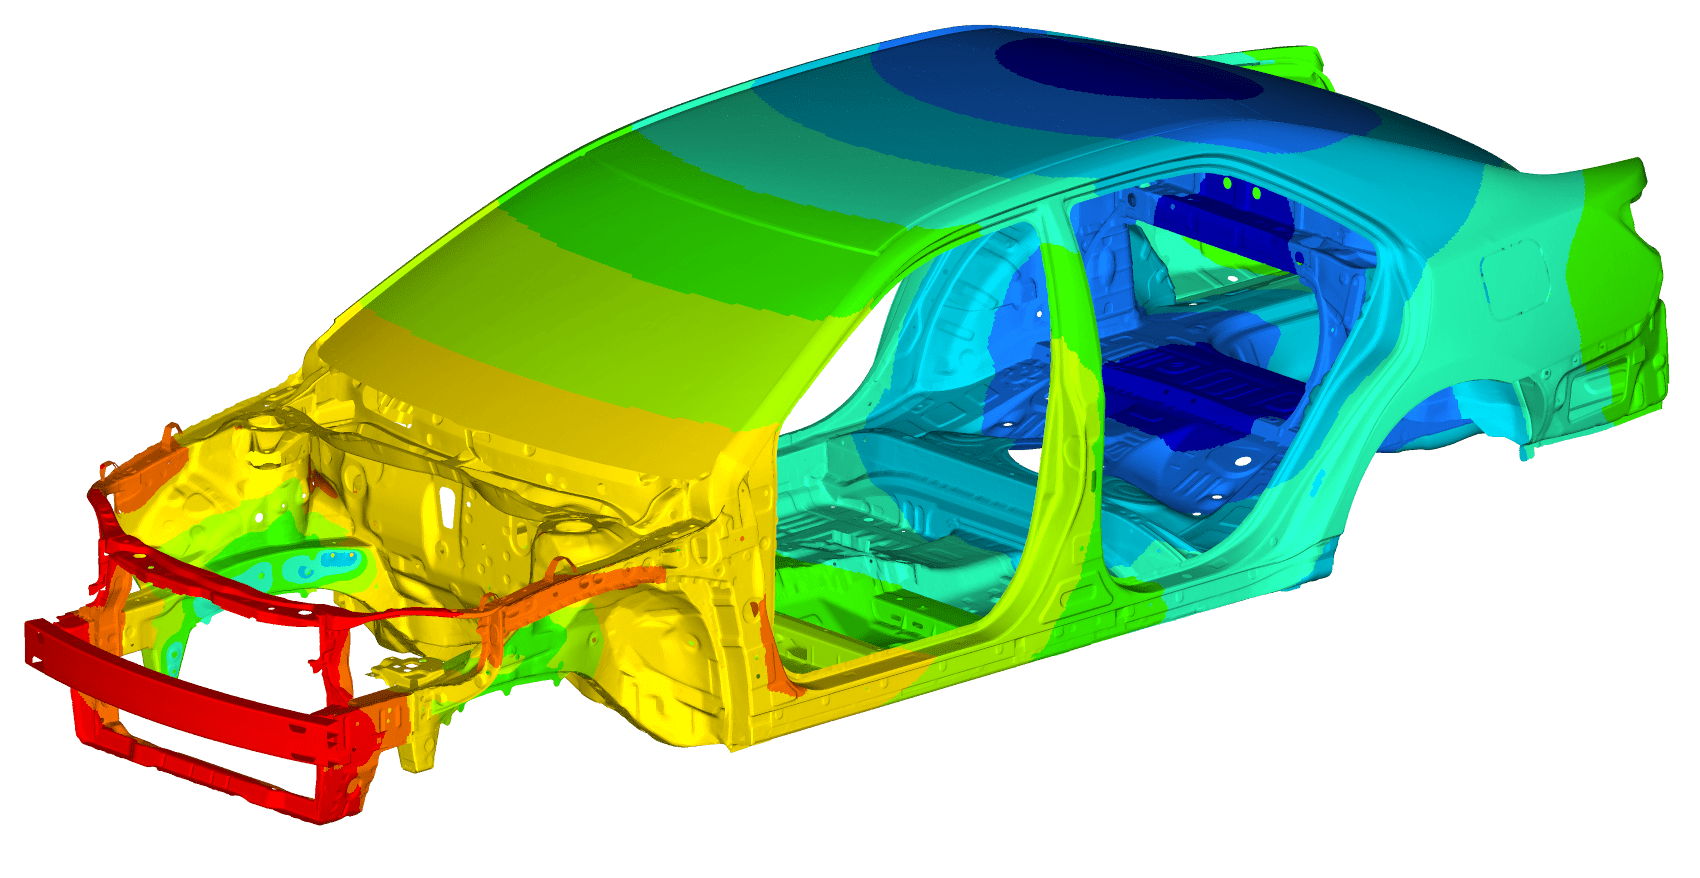 Automotive chassis NVH featured image